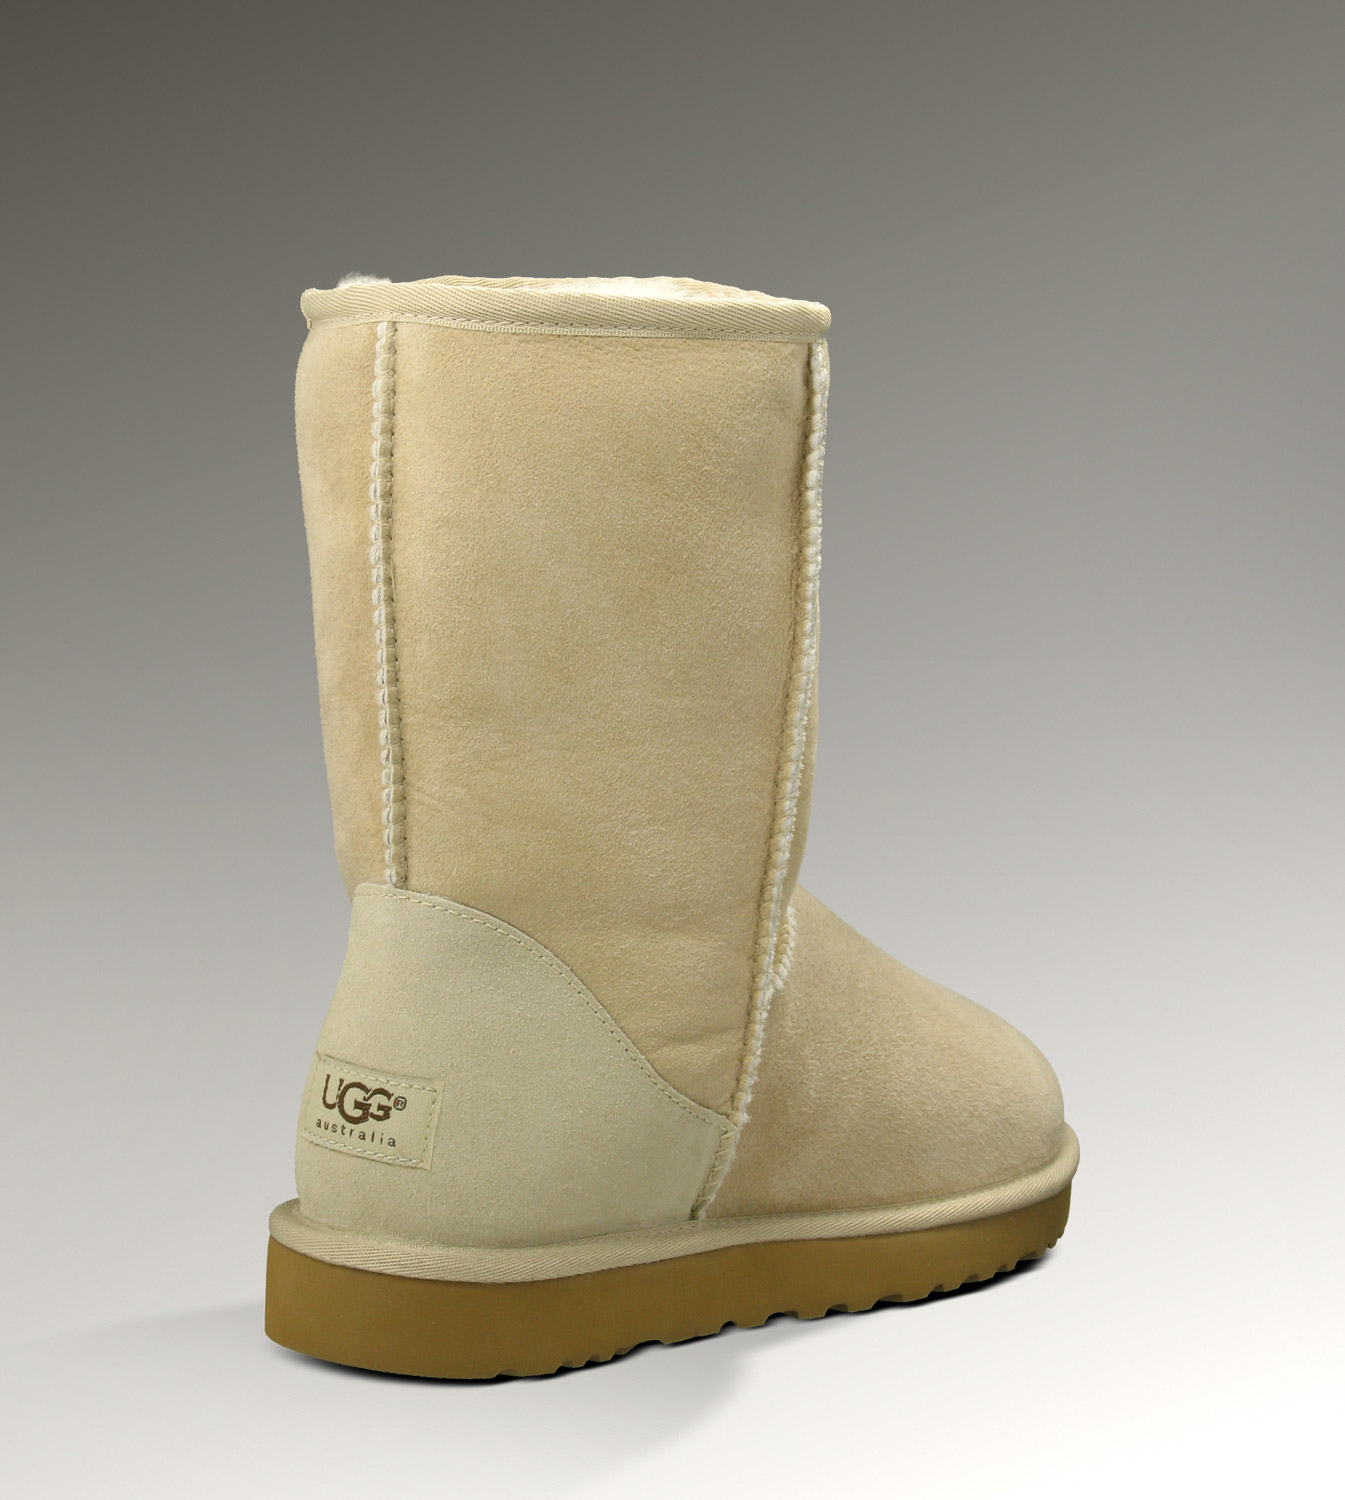 Ugg Outlet Classic Short Sand Boots 586170